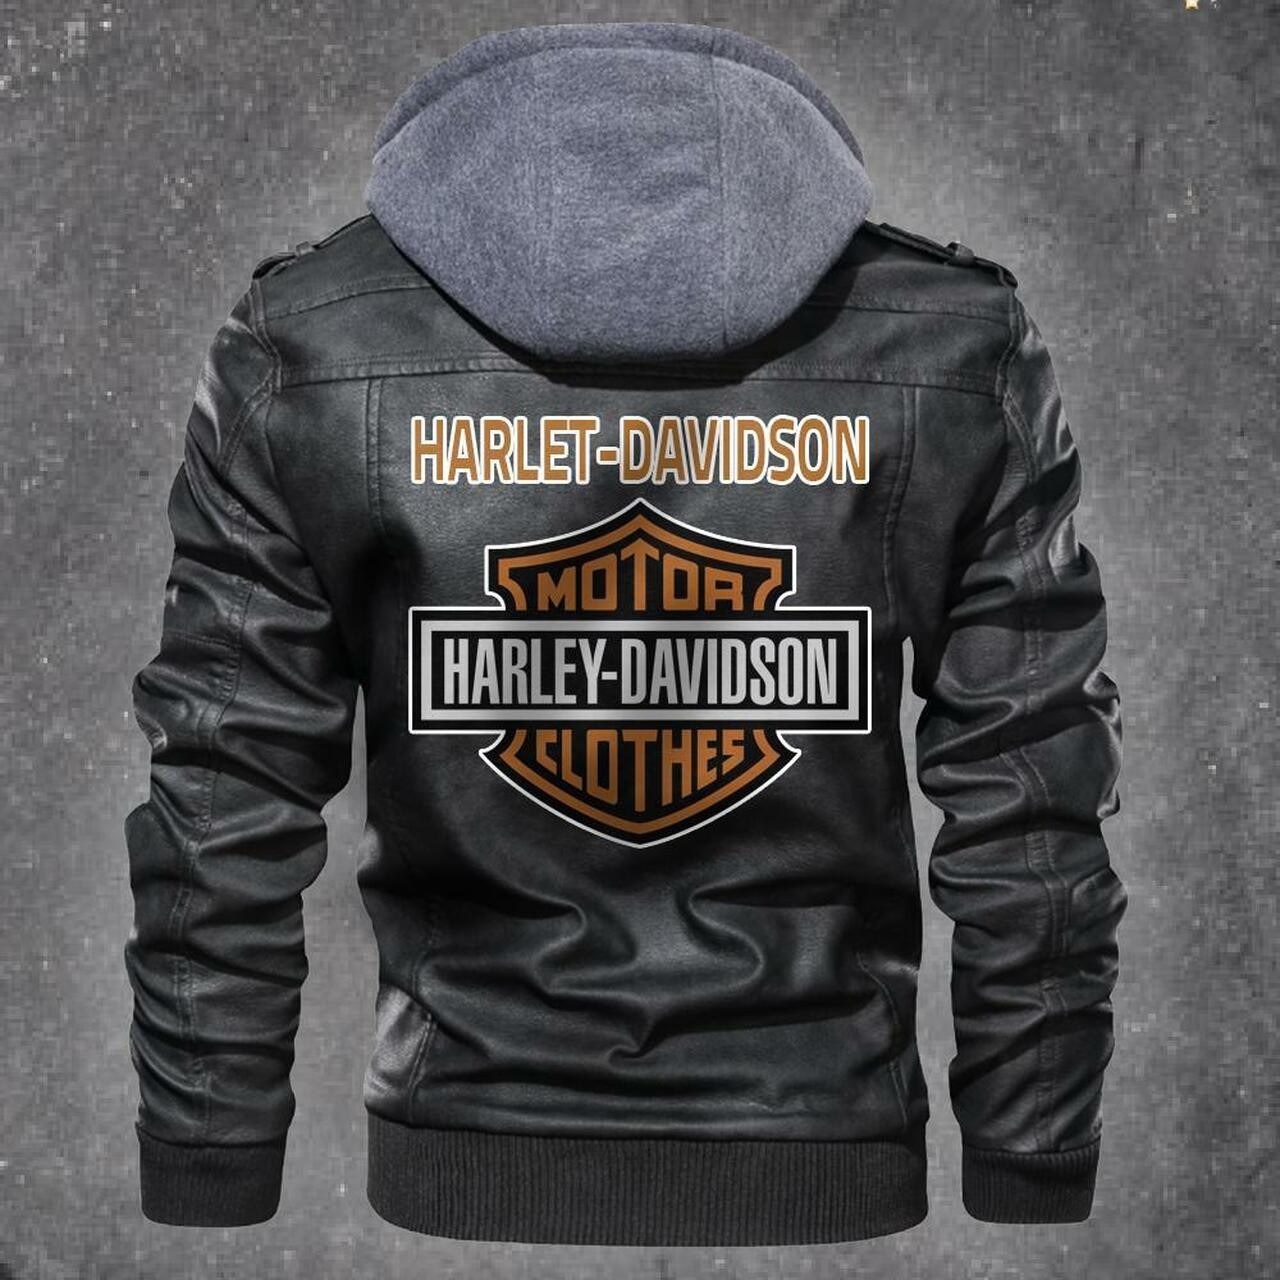 Our store has all of the latest leather jacket 158